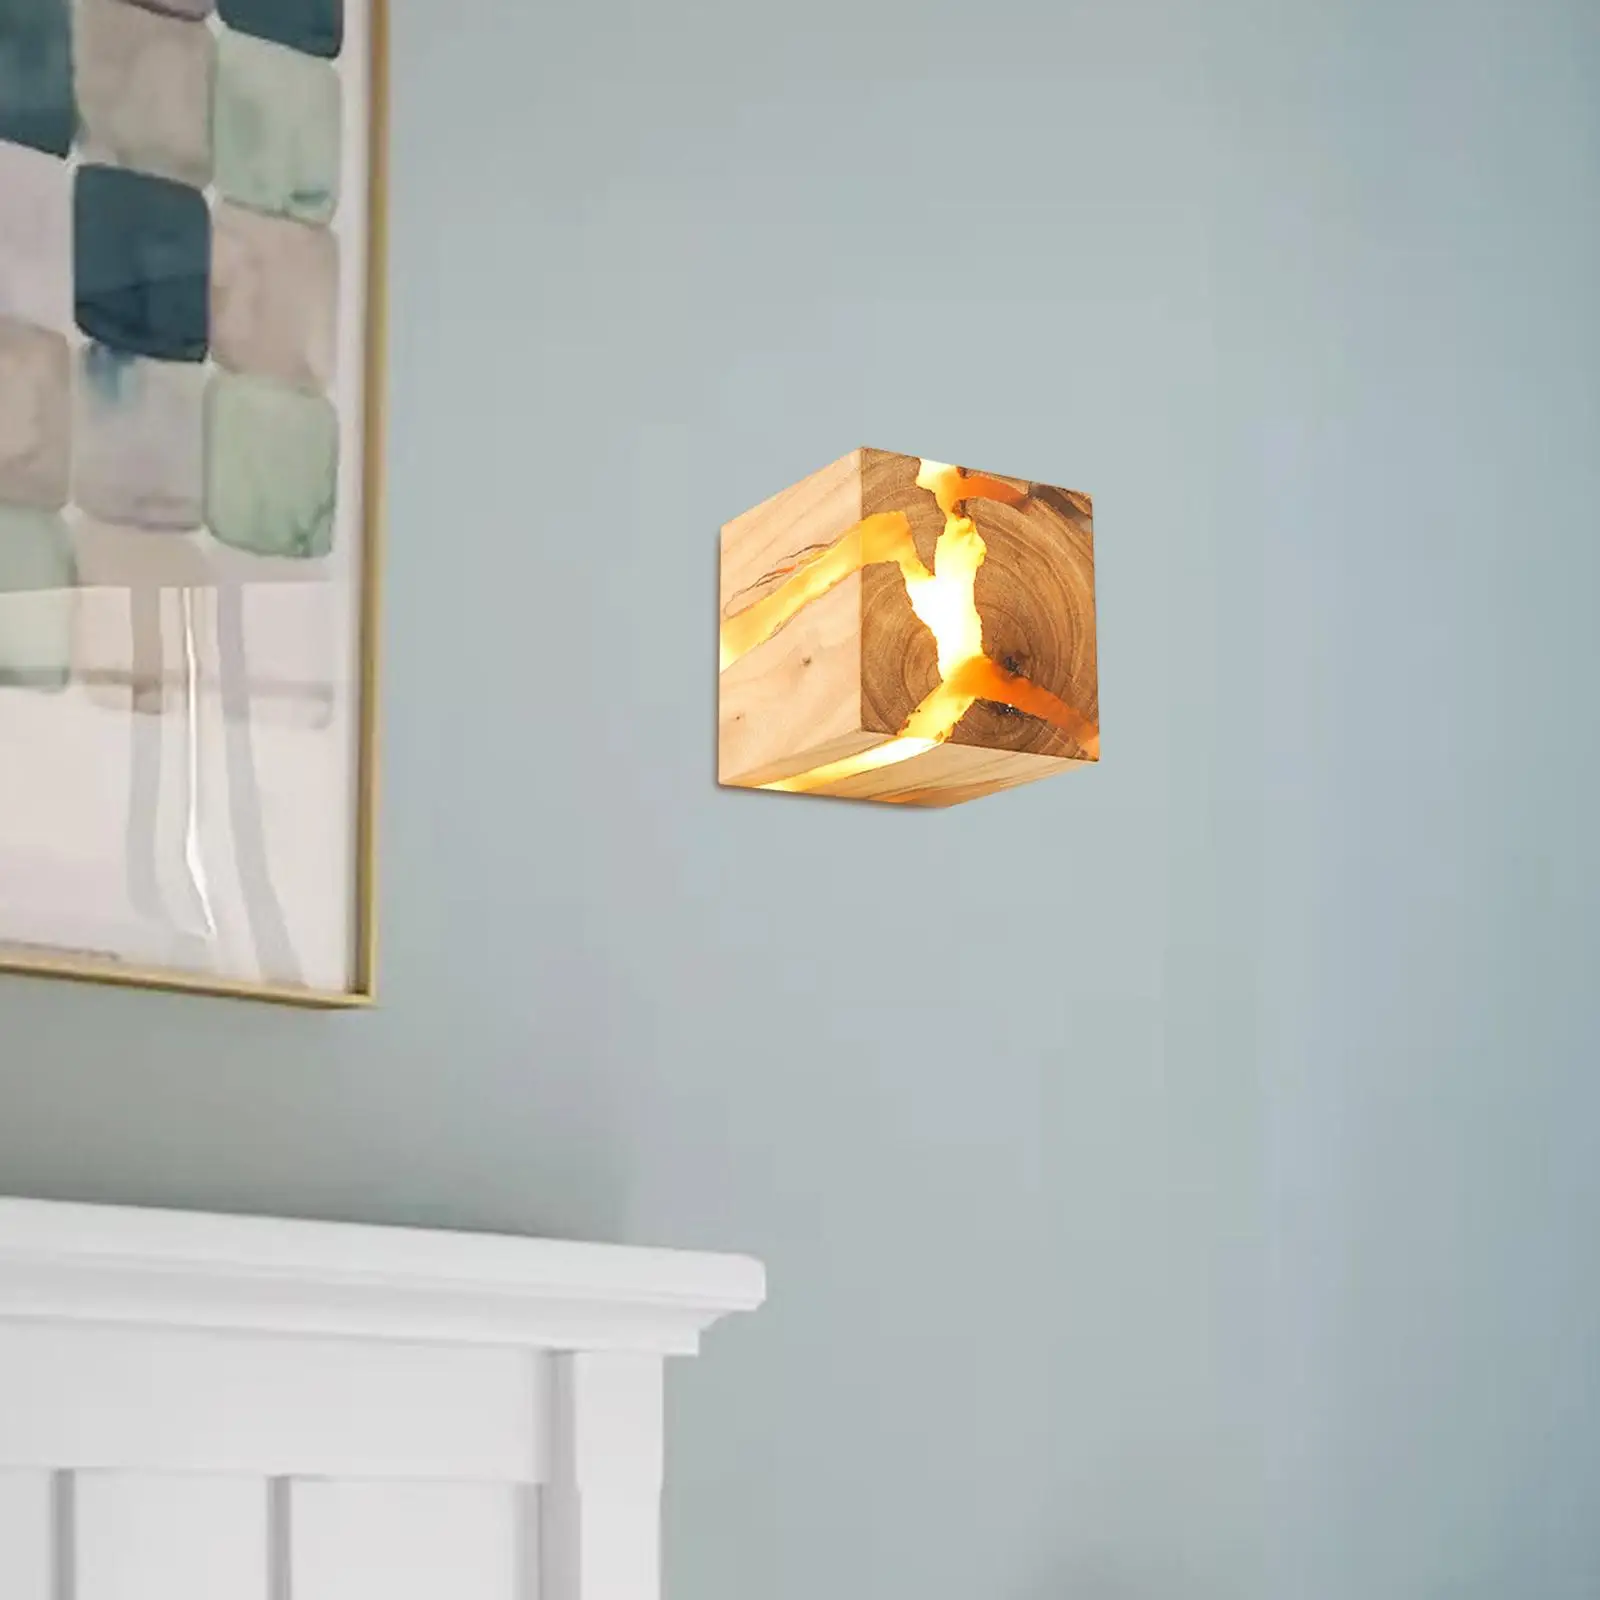 Wood Resin Wall Light Fashionable Decorative Square LED 5W Photo Prop Bedside Lamp for Hotel Cafe Home Restaurant Decor